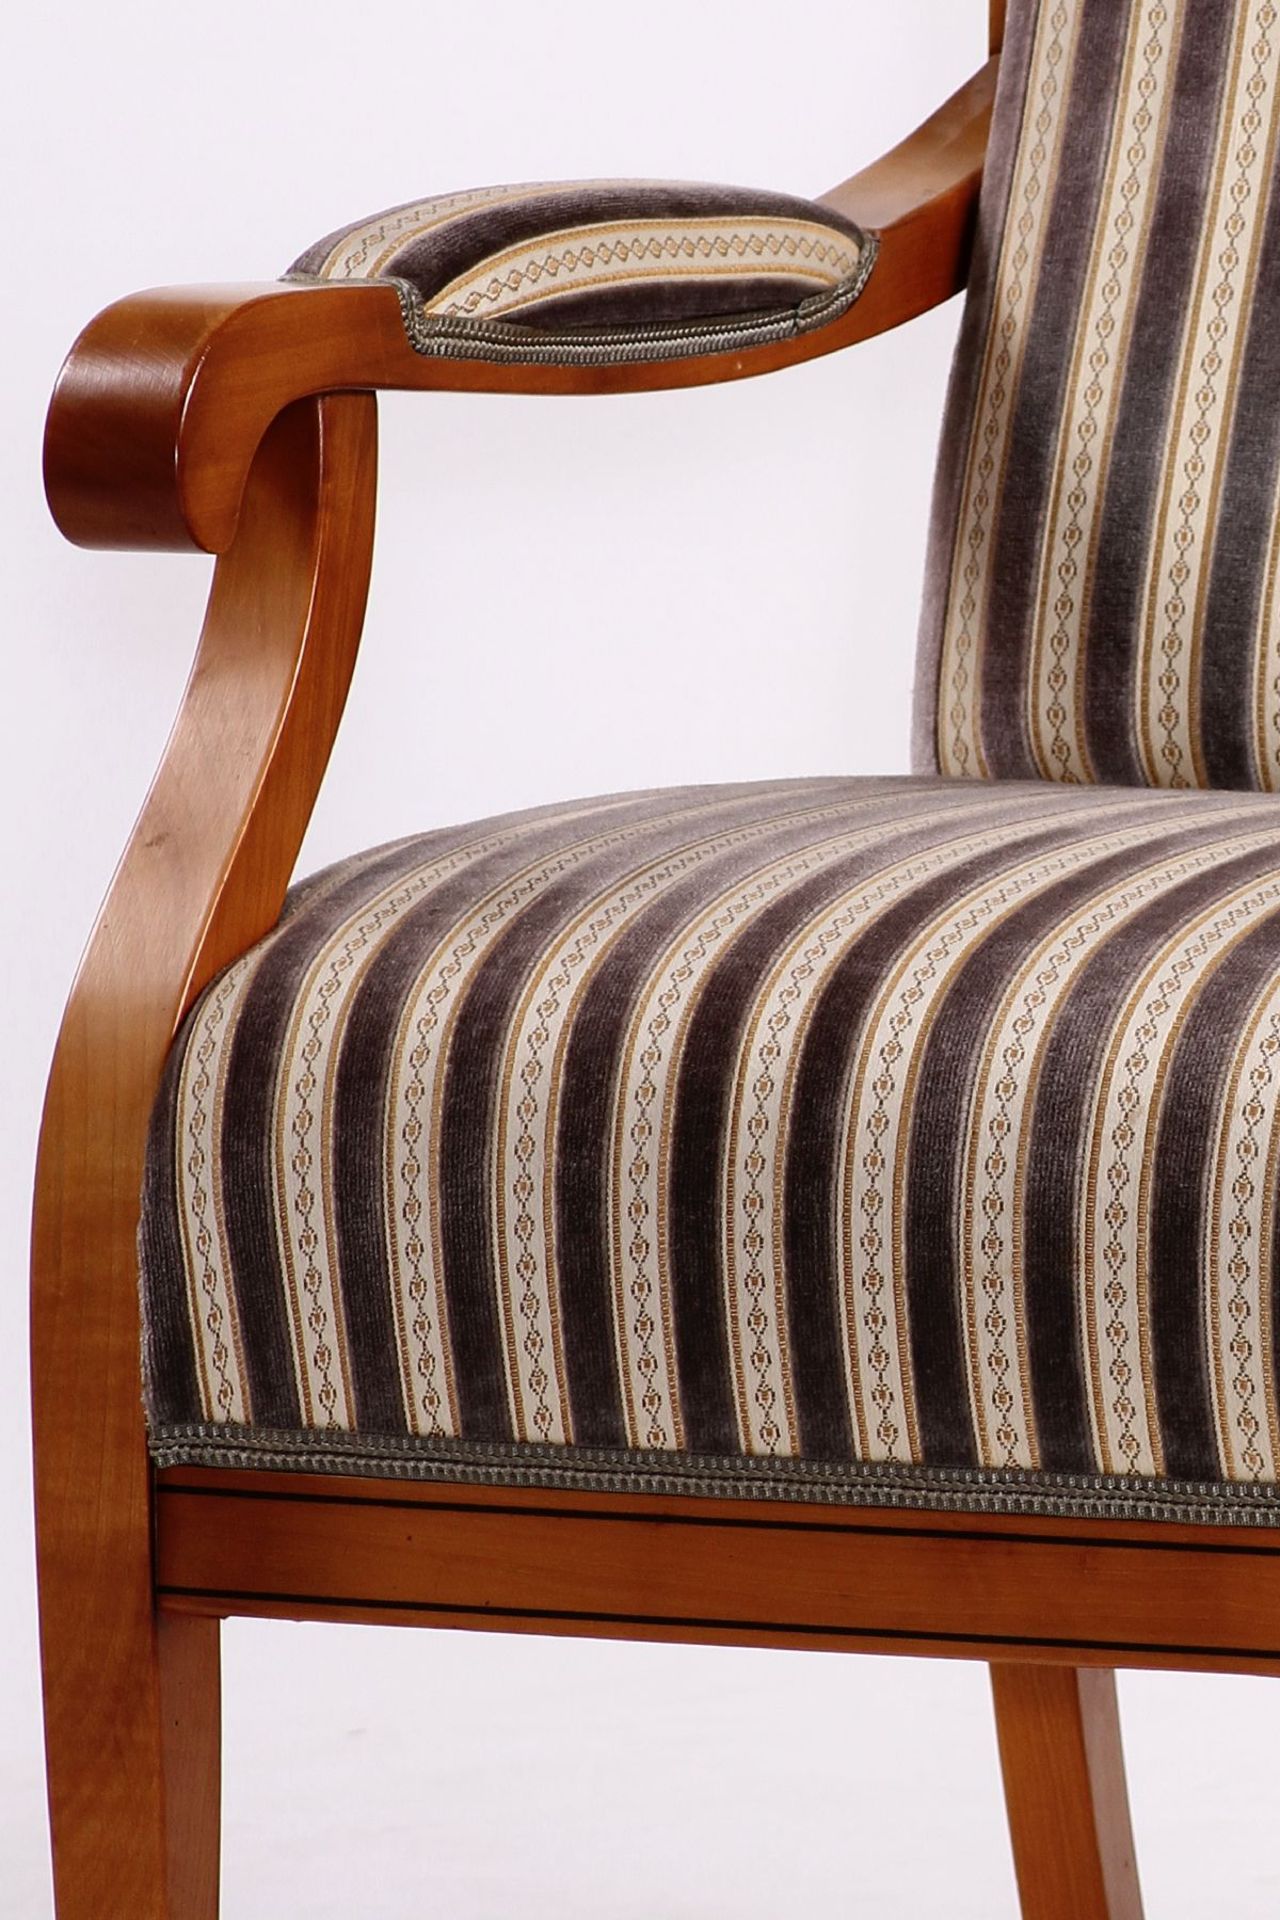 Armchair, in Biedermeier style, solid cherry, elegantly curved on all sides, high-quality fabric - Bild 3 aus 3